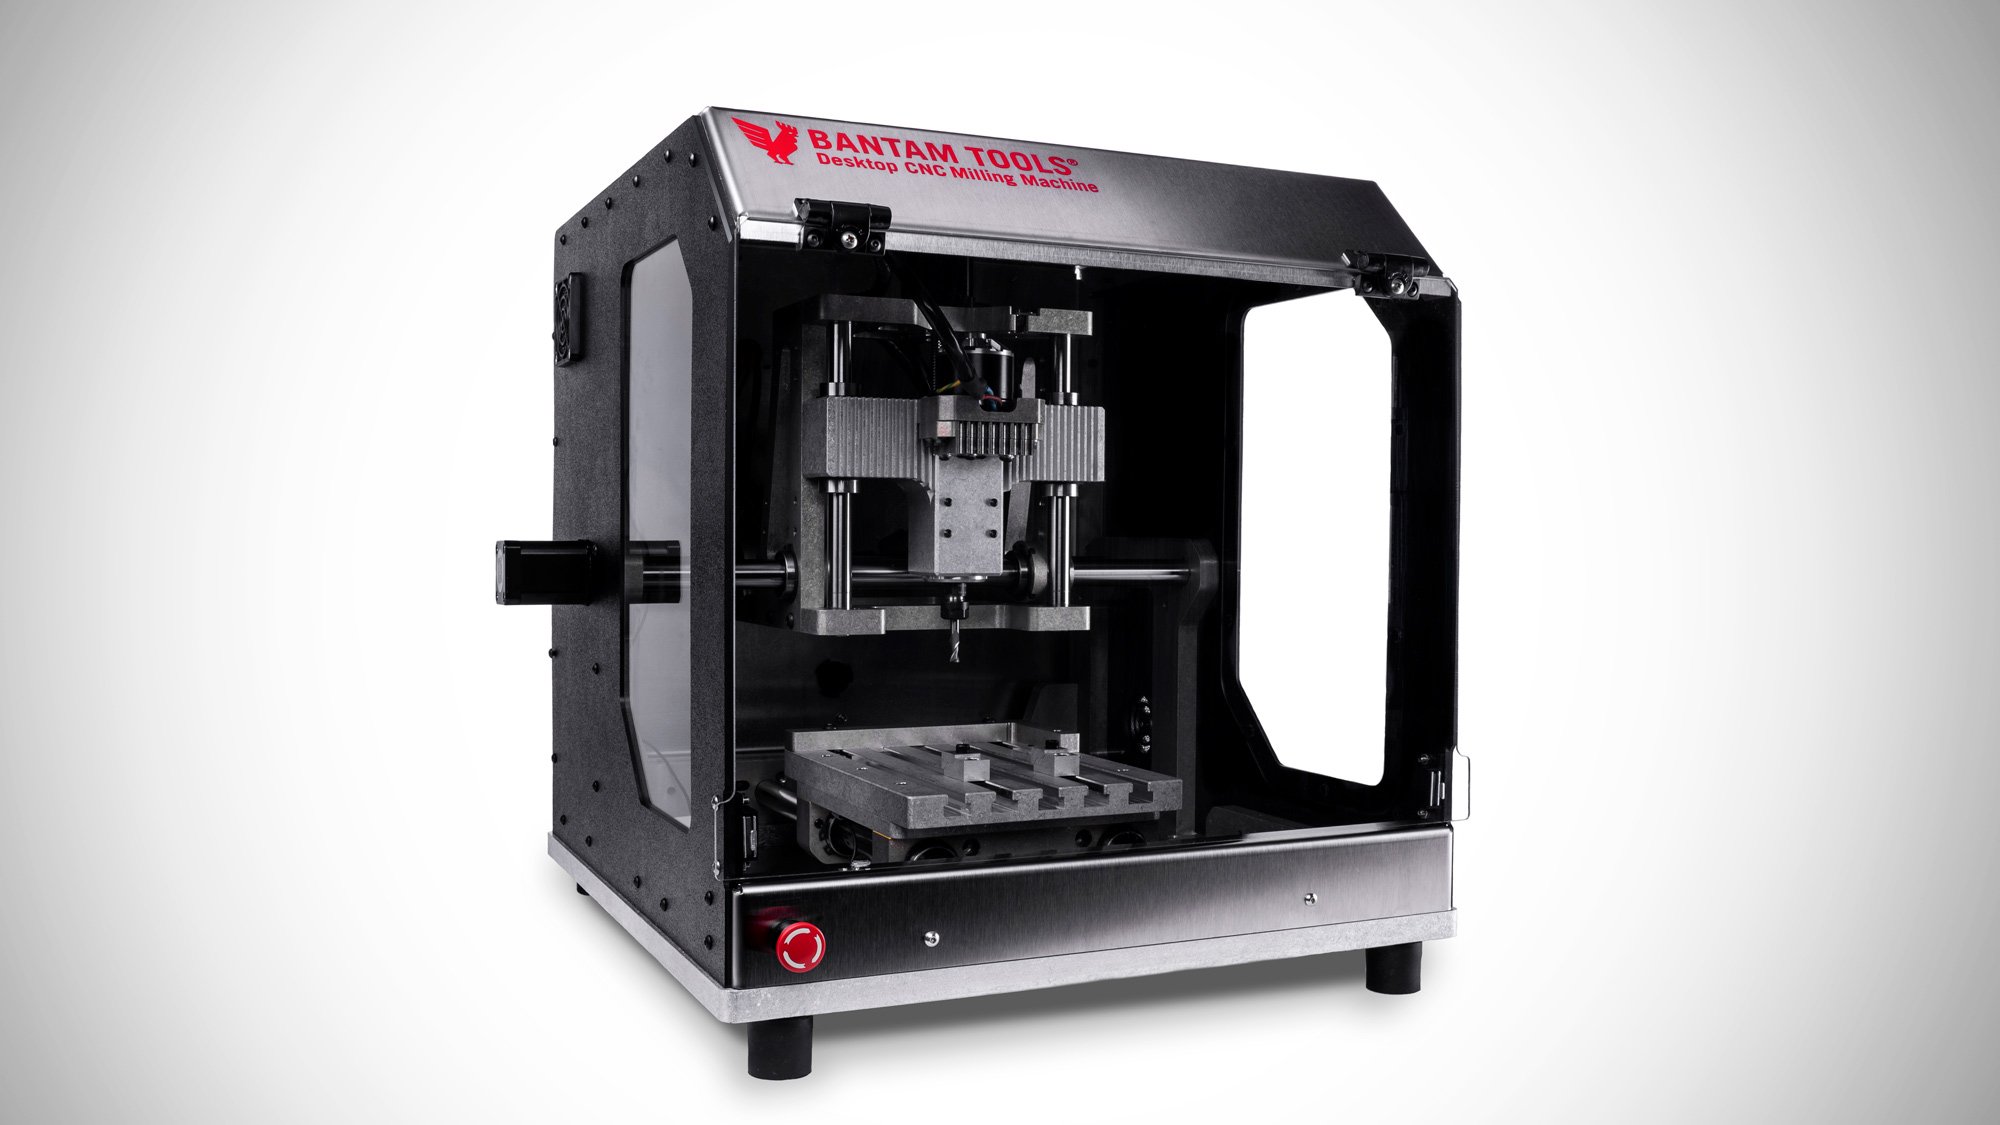 Bantam Tools Desktop PCB Milling Machine - Everything You Need to Know